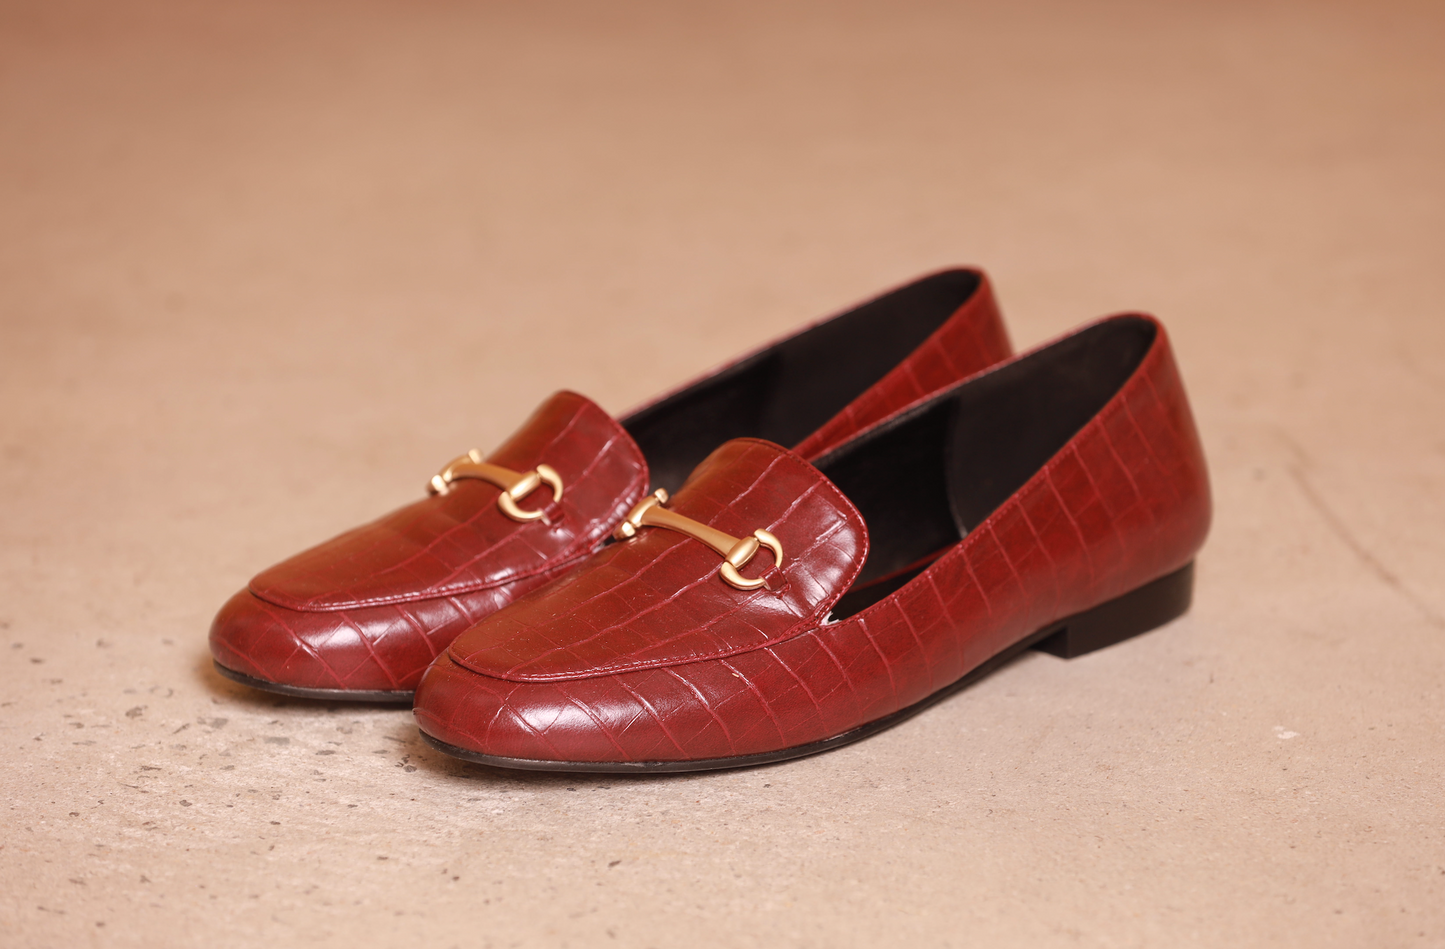 Reese Loafers Burgundy